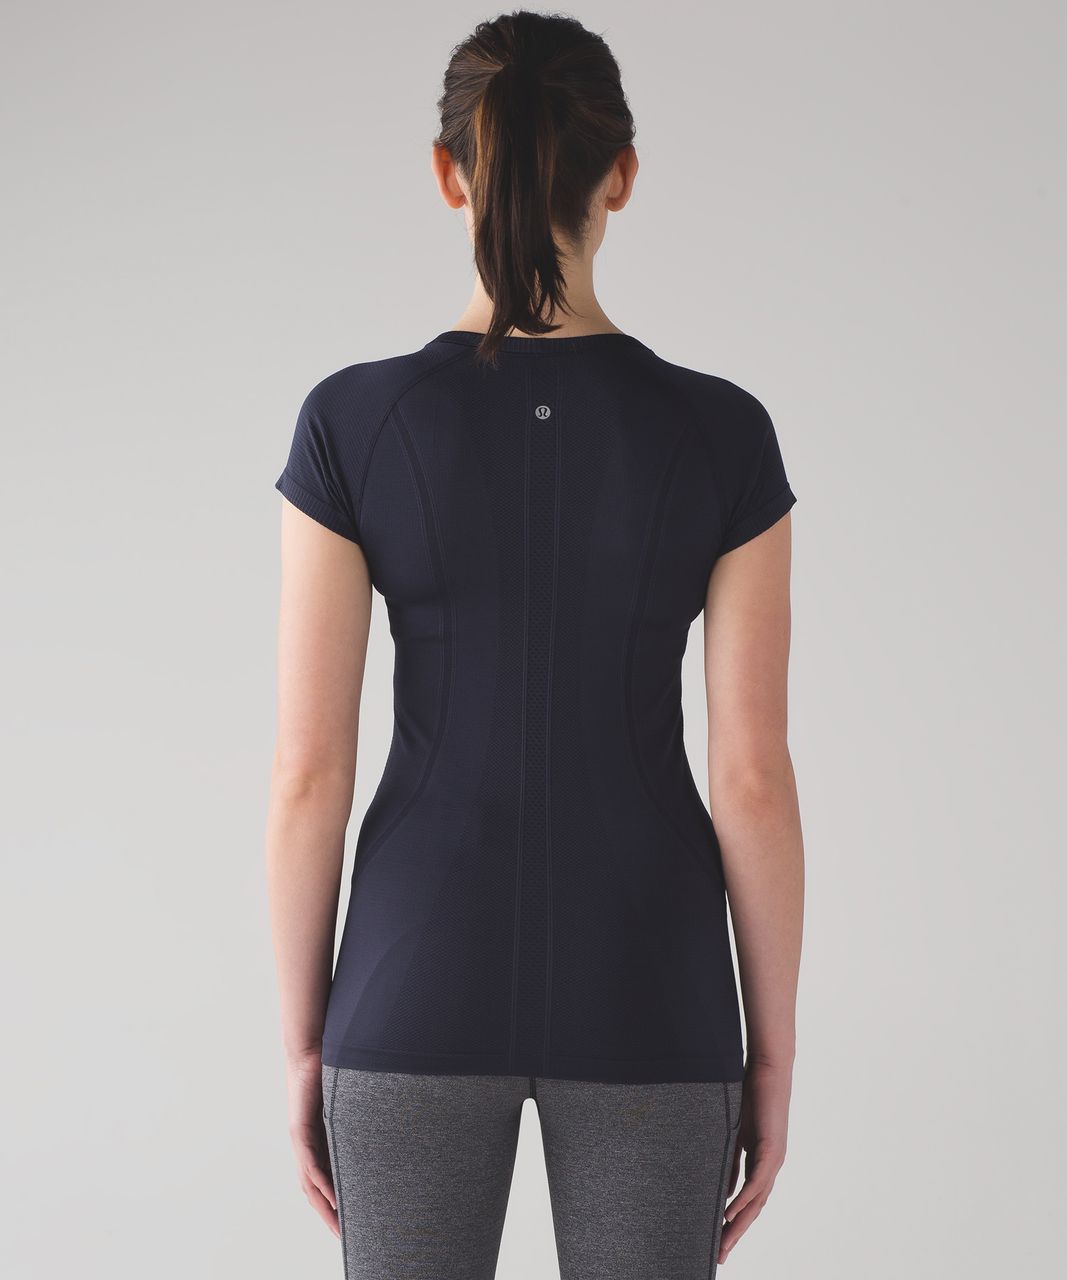 Chandail manches courtes Swiftly Tech Lululemon